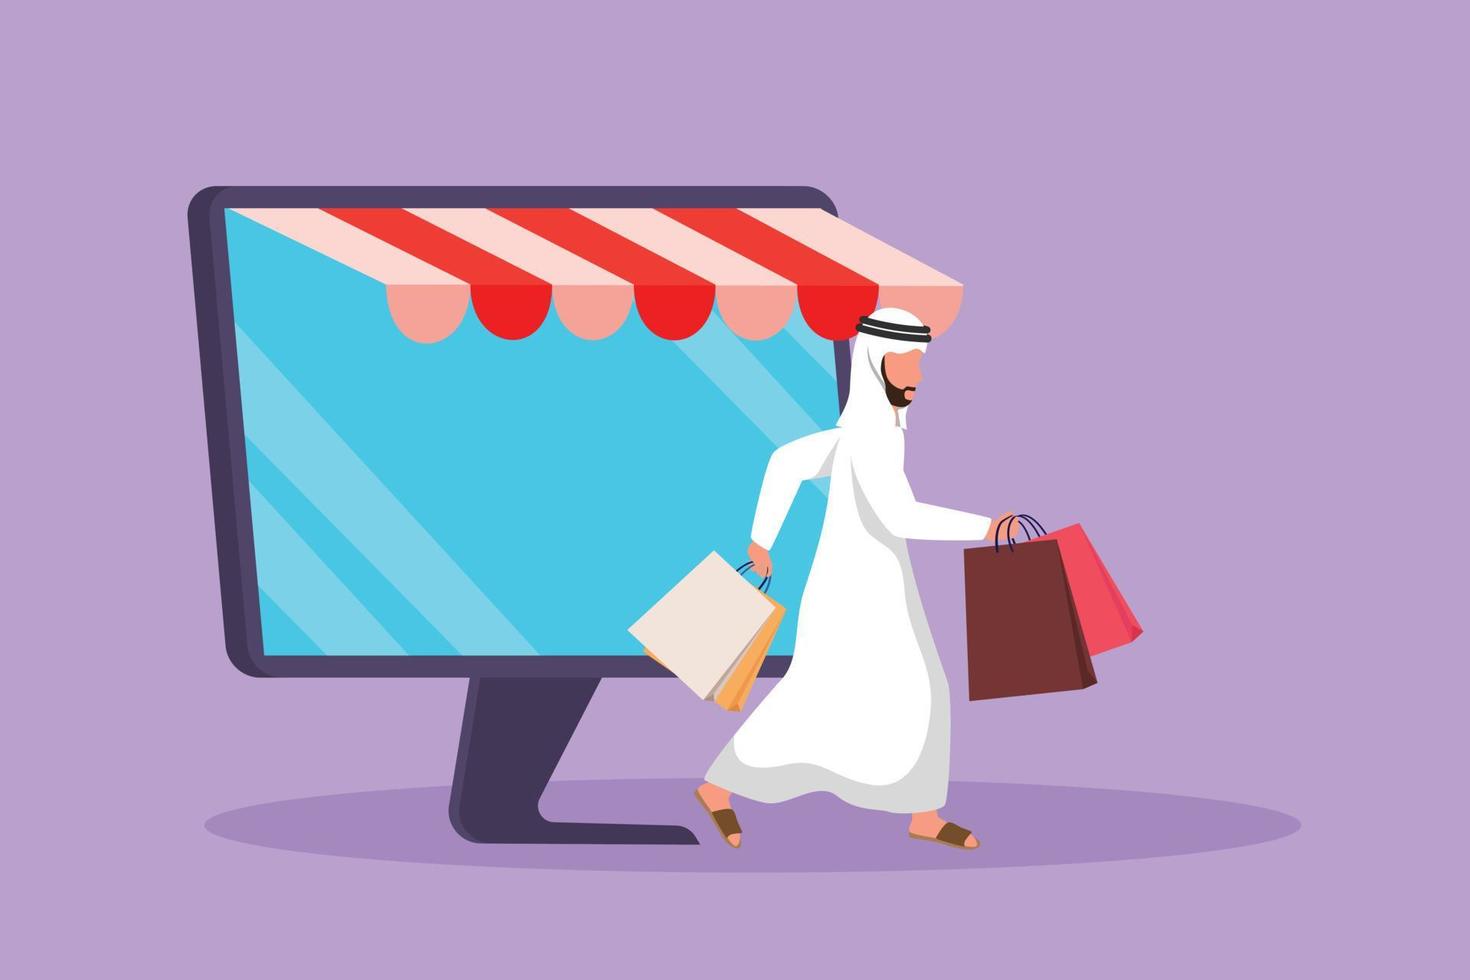 Character flat drawing Arab man walking and coming out of monitor screen holding shopping bag. Sale, digital lifestyle, consumerism concept. Online store technology. Cartoon design vector illustration